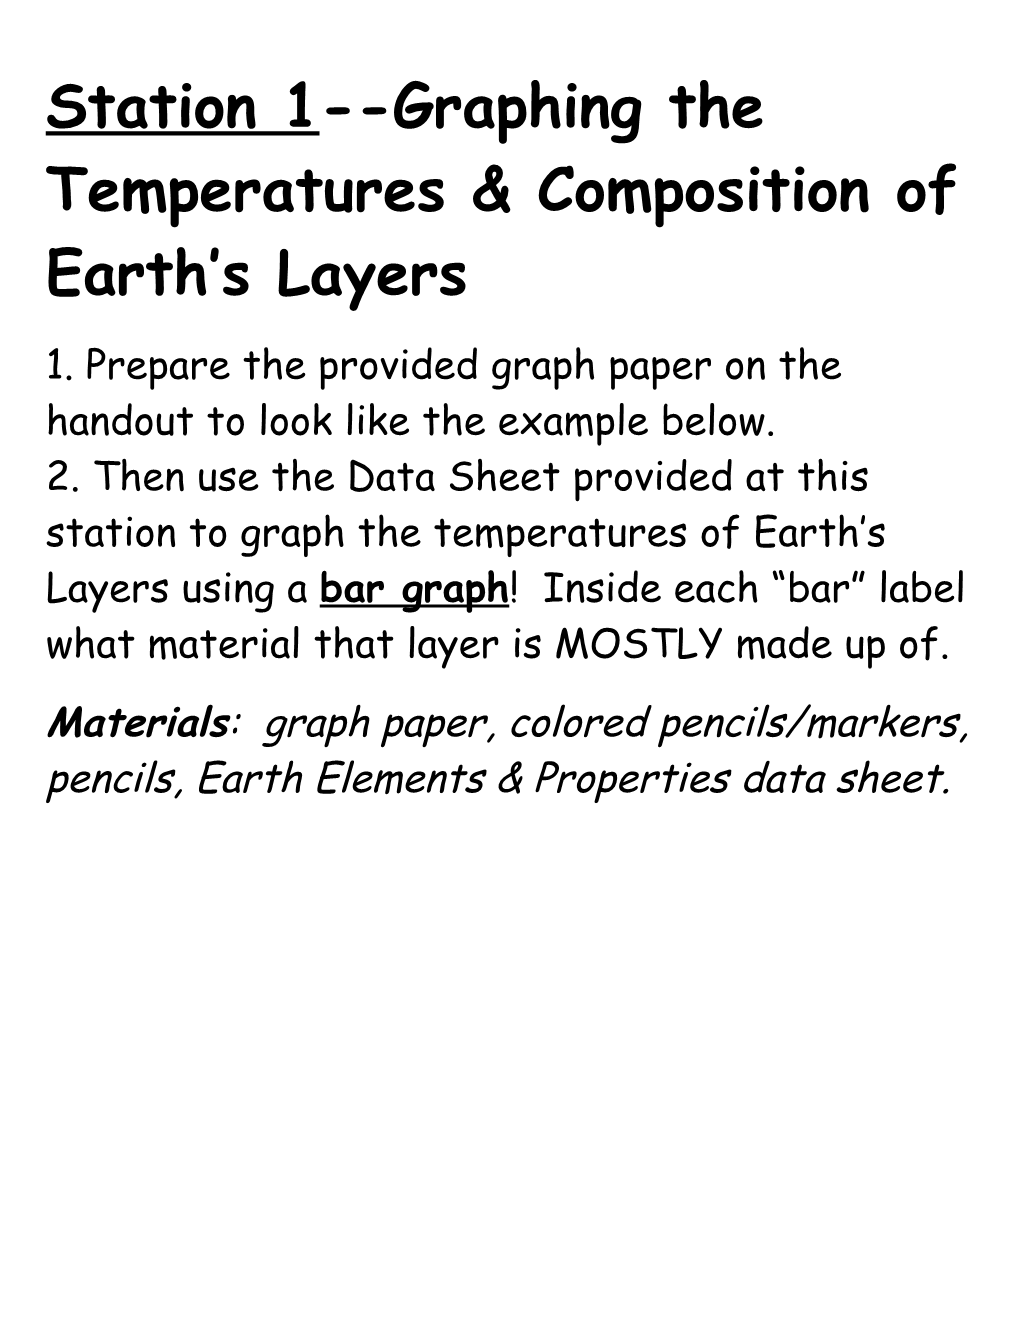 Station 1 Graphing the Temperatures & Composition of Earth S Layers